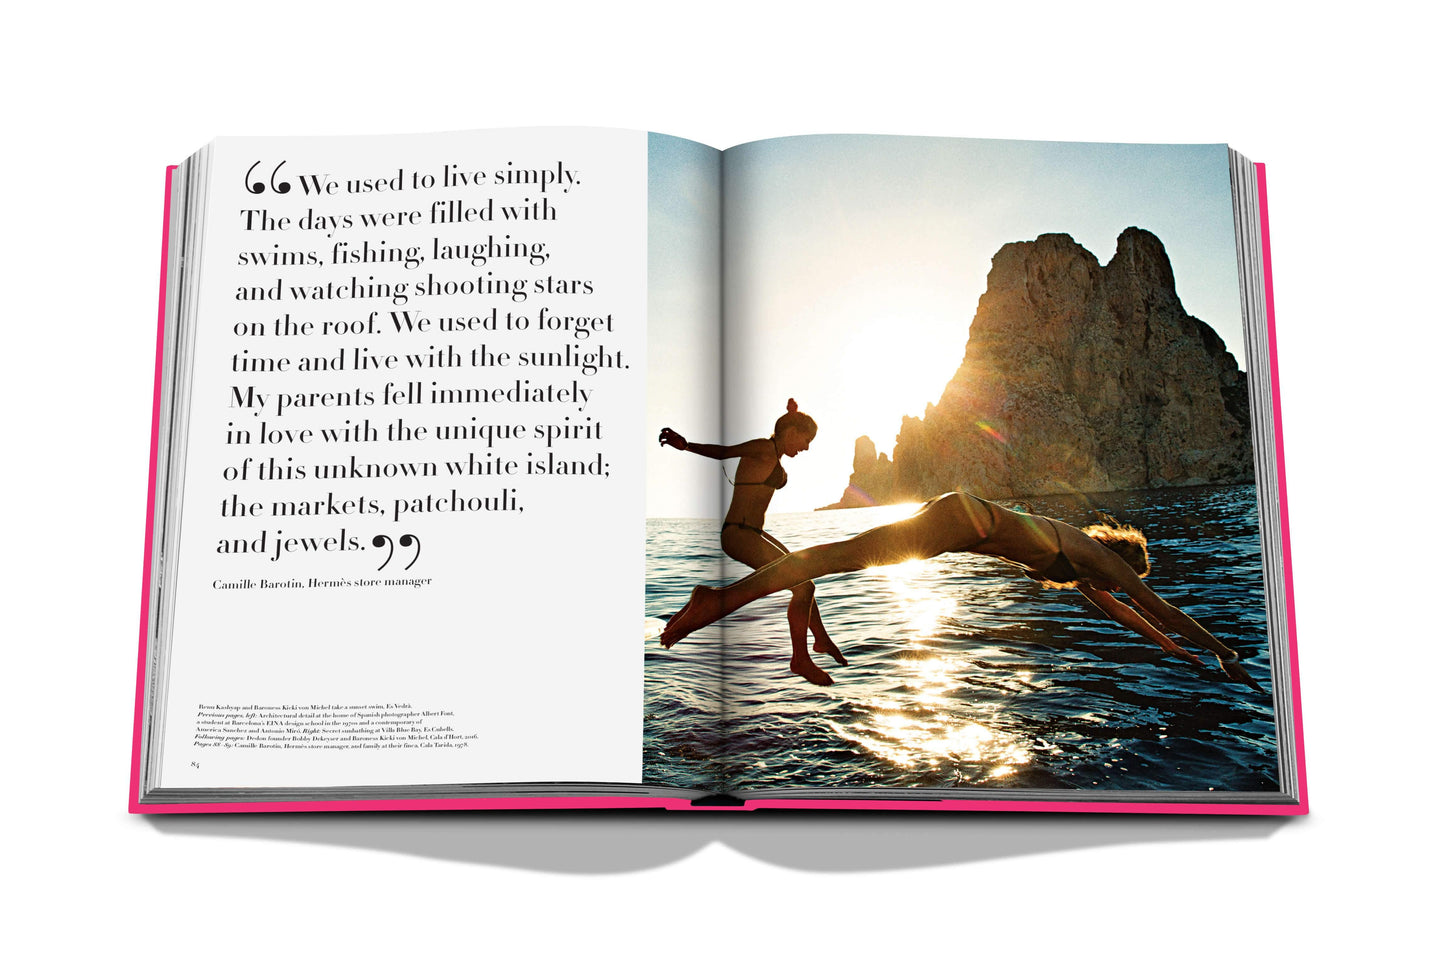 Ibiza Bohemia Coffee Table Book by Assouline - Haven